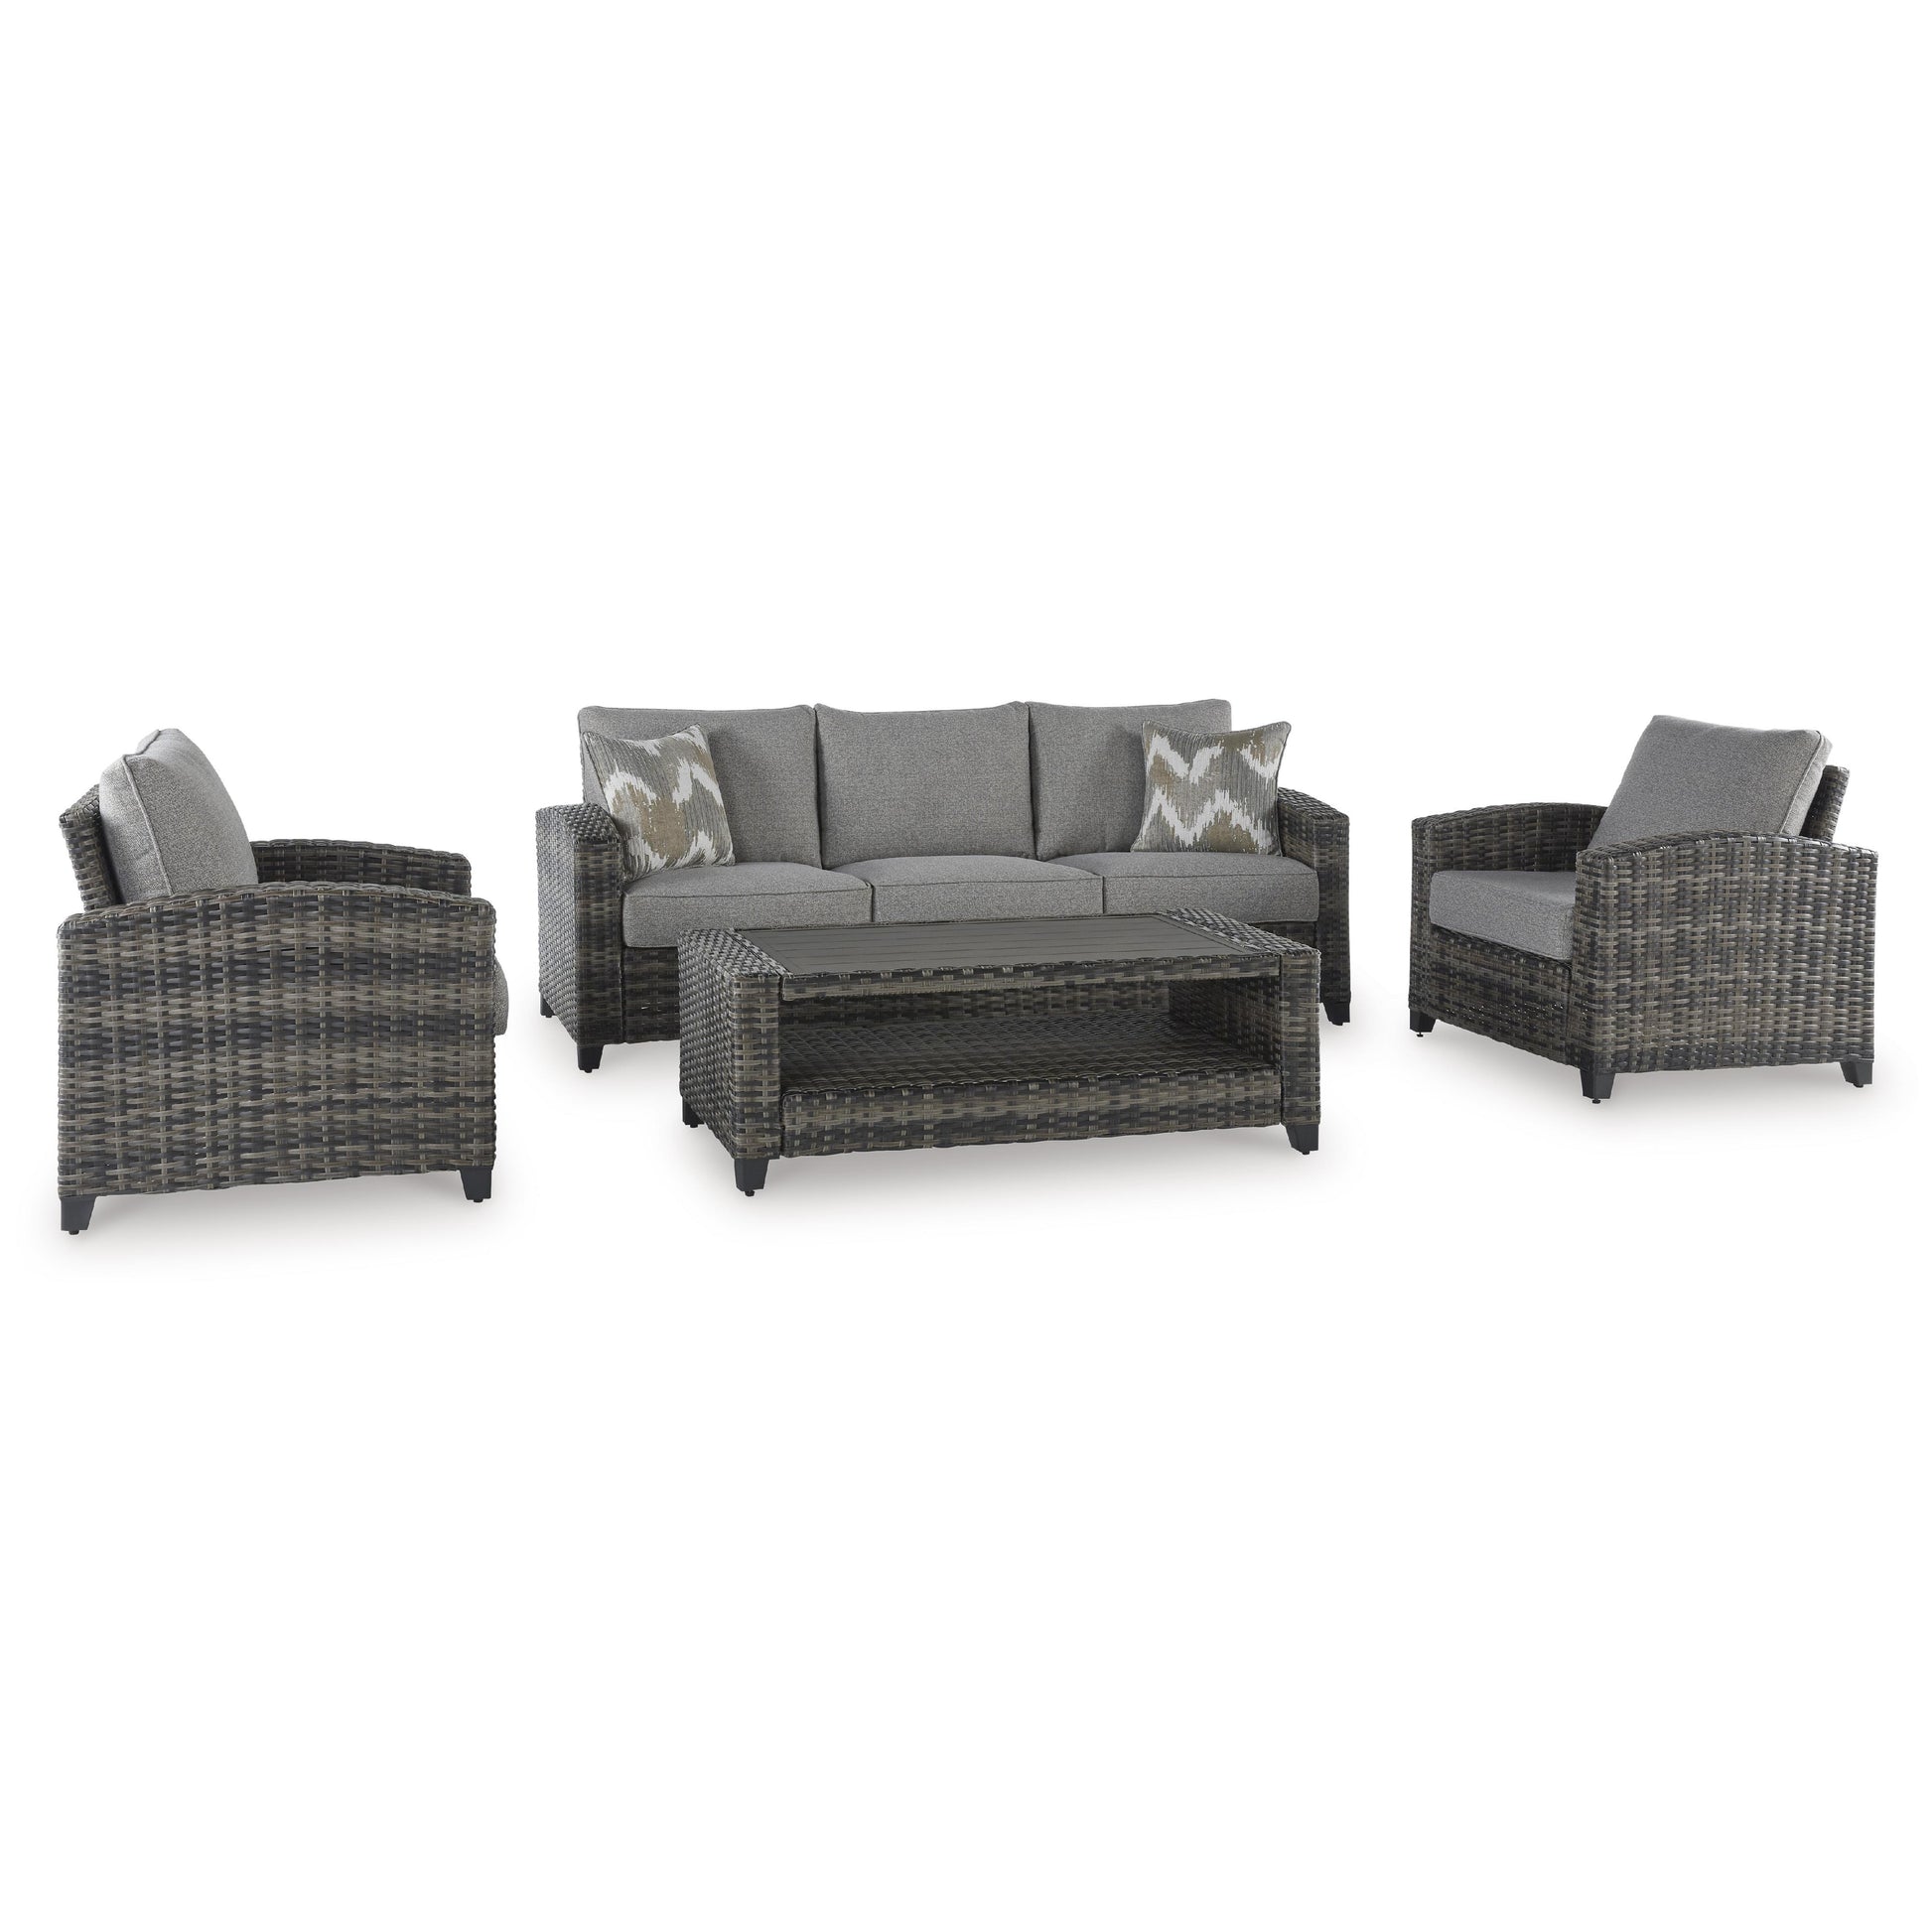 Signature Design by Ashley Outdoor Seating Sets P335-081 IMAGE 1